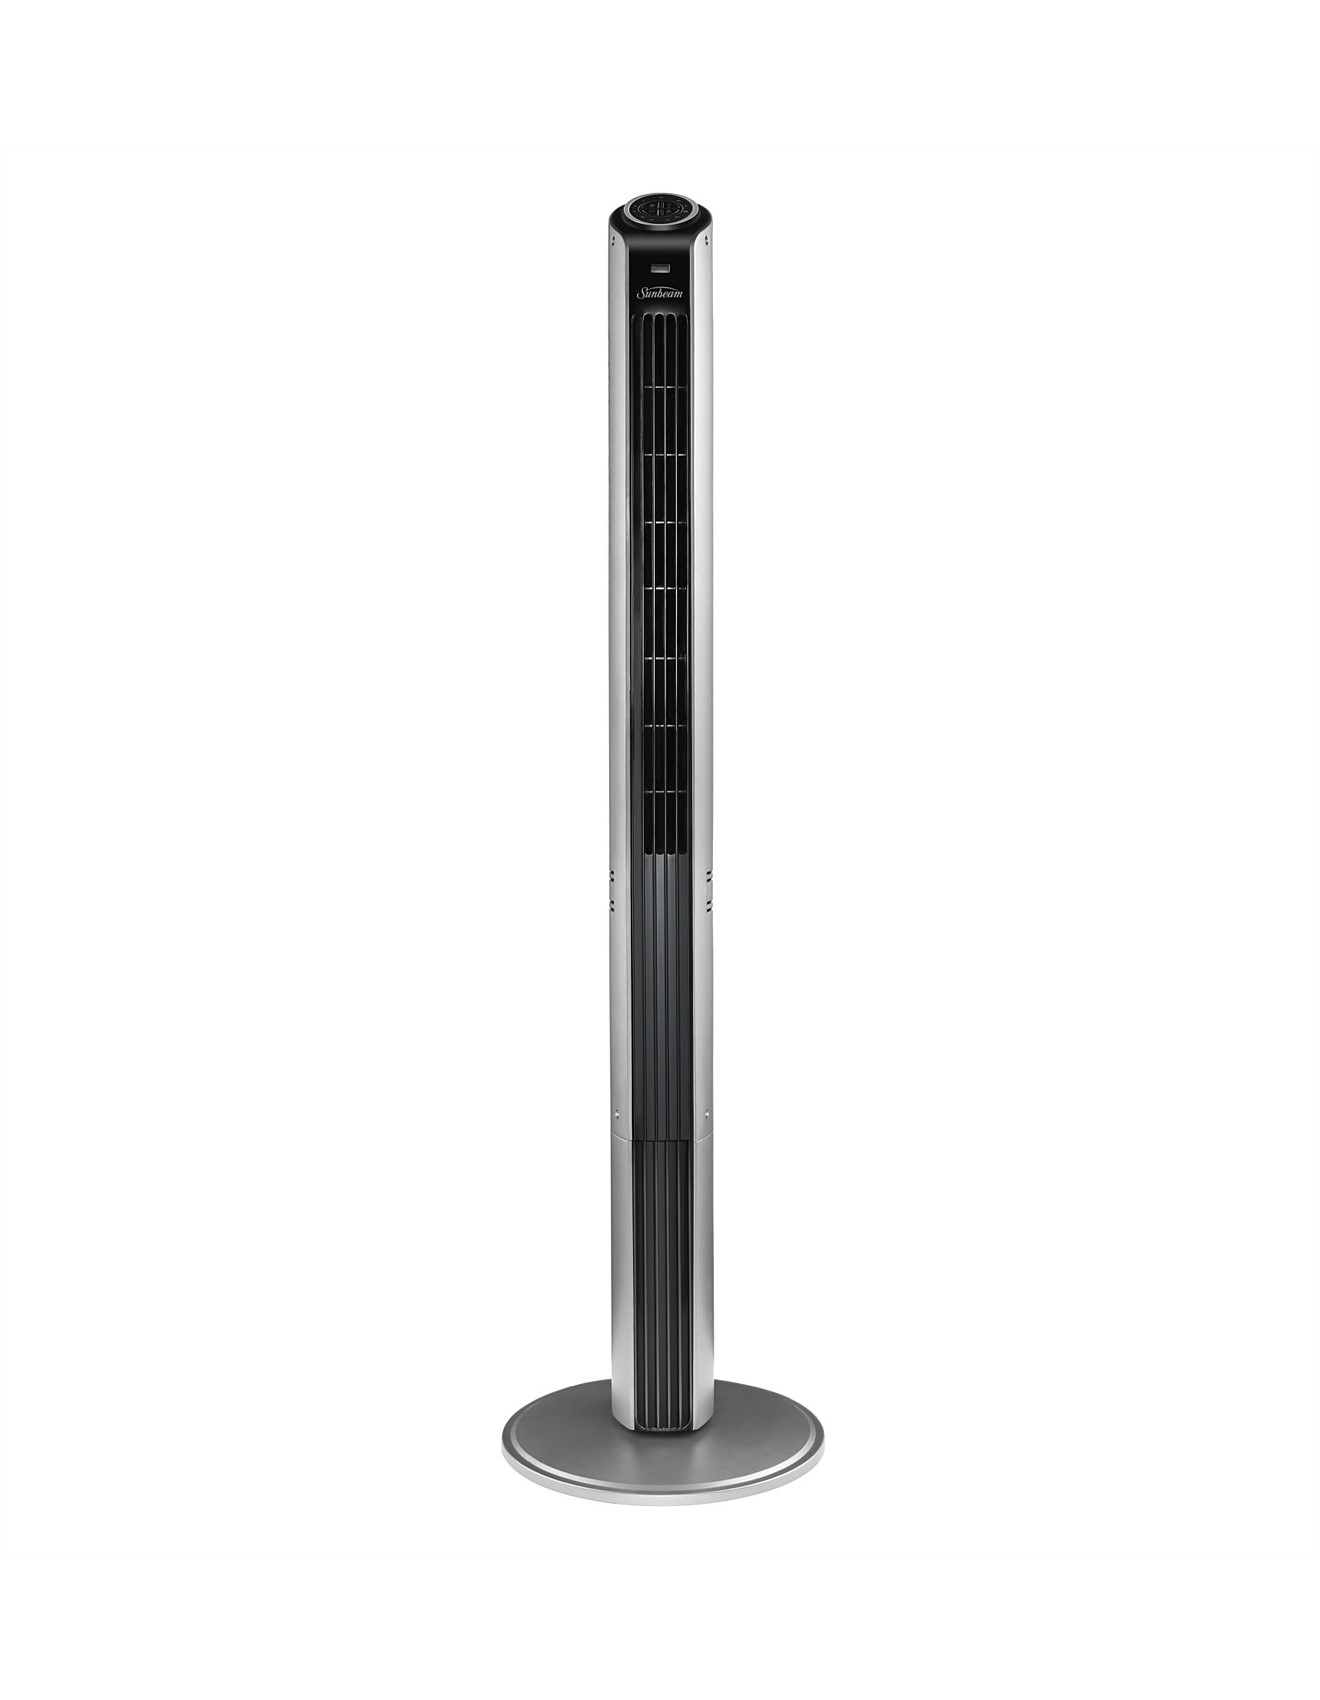 Super Slim Tower Fan With Night Mode within sizing 1320 X 1700